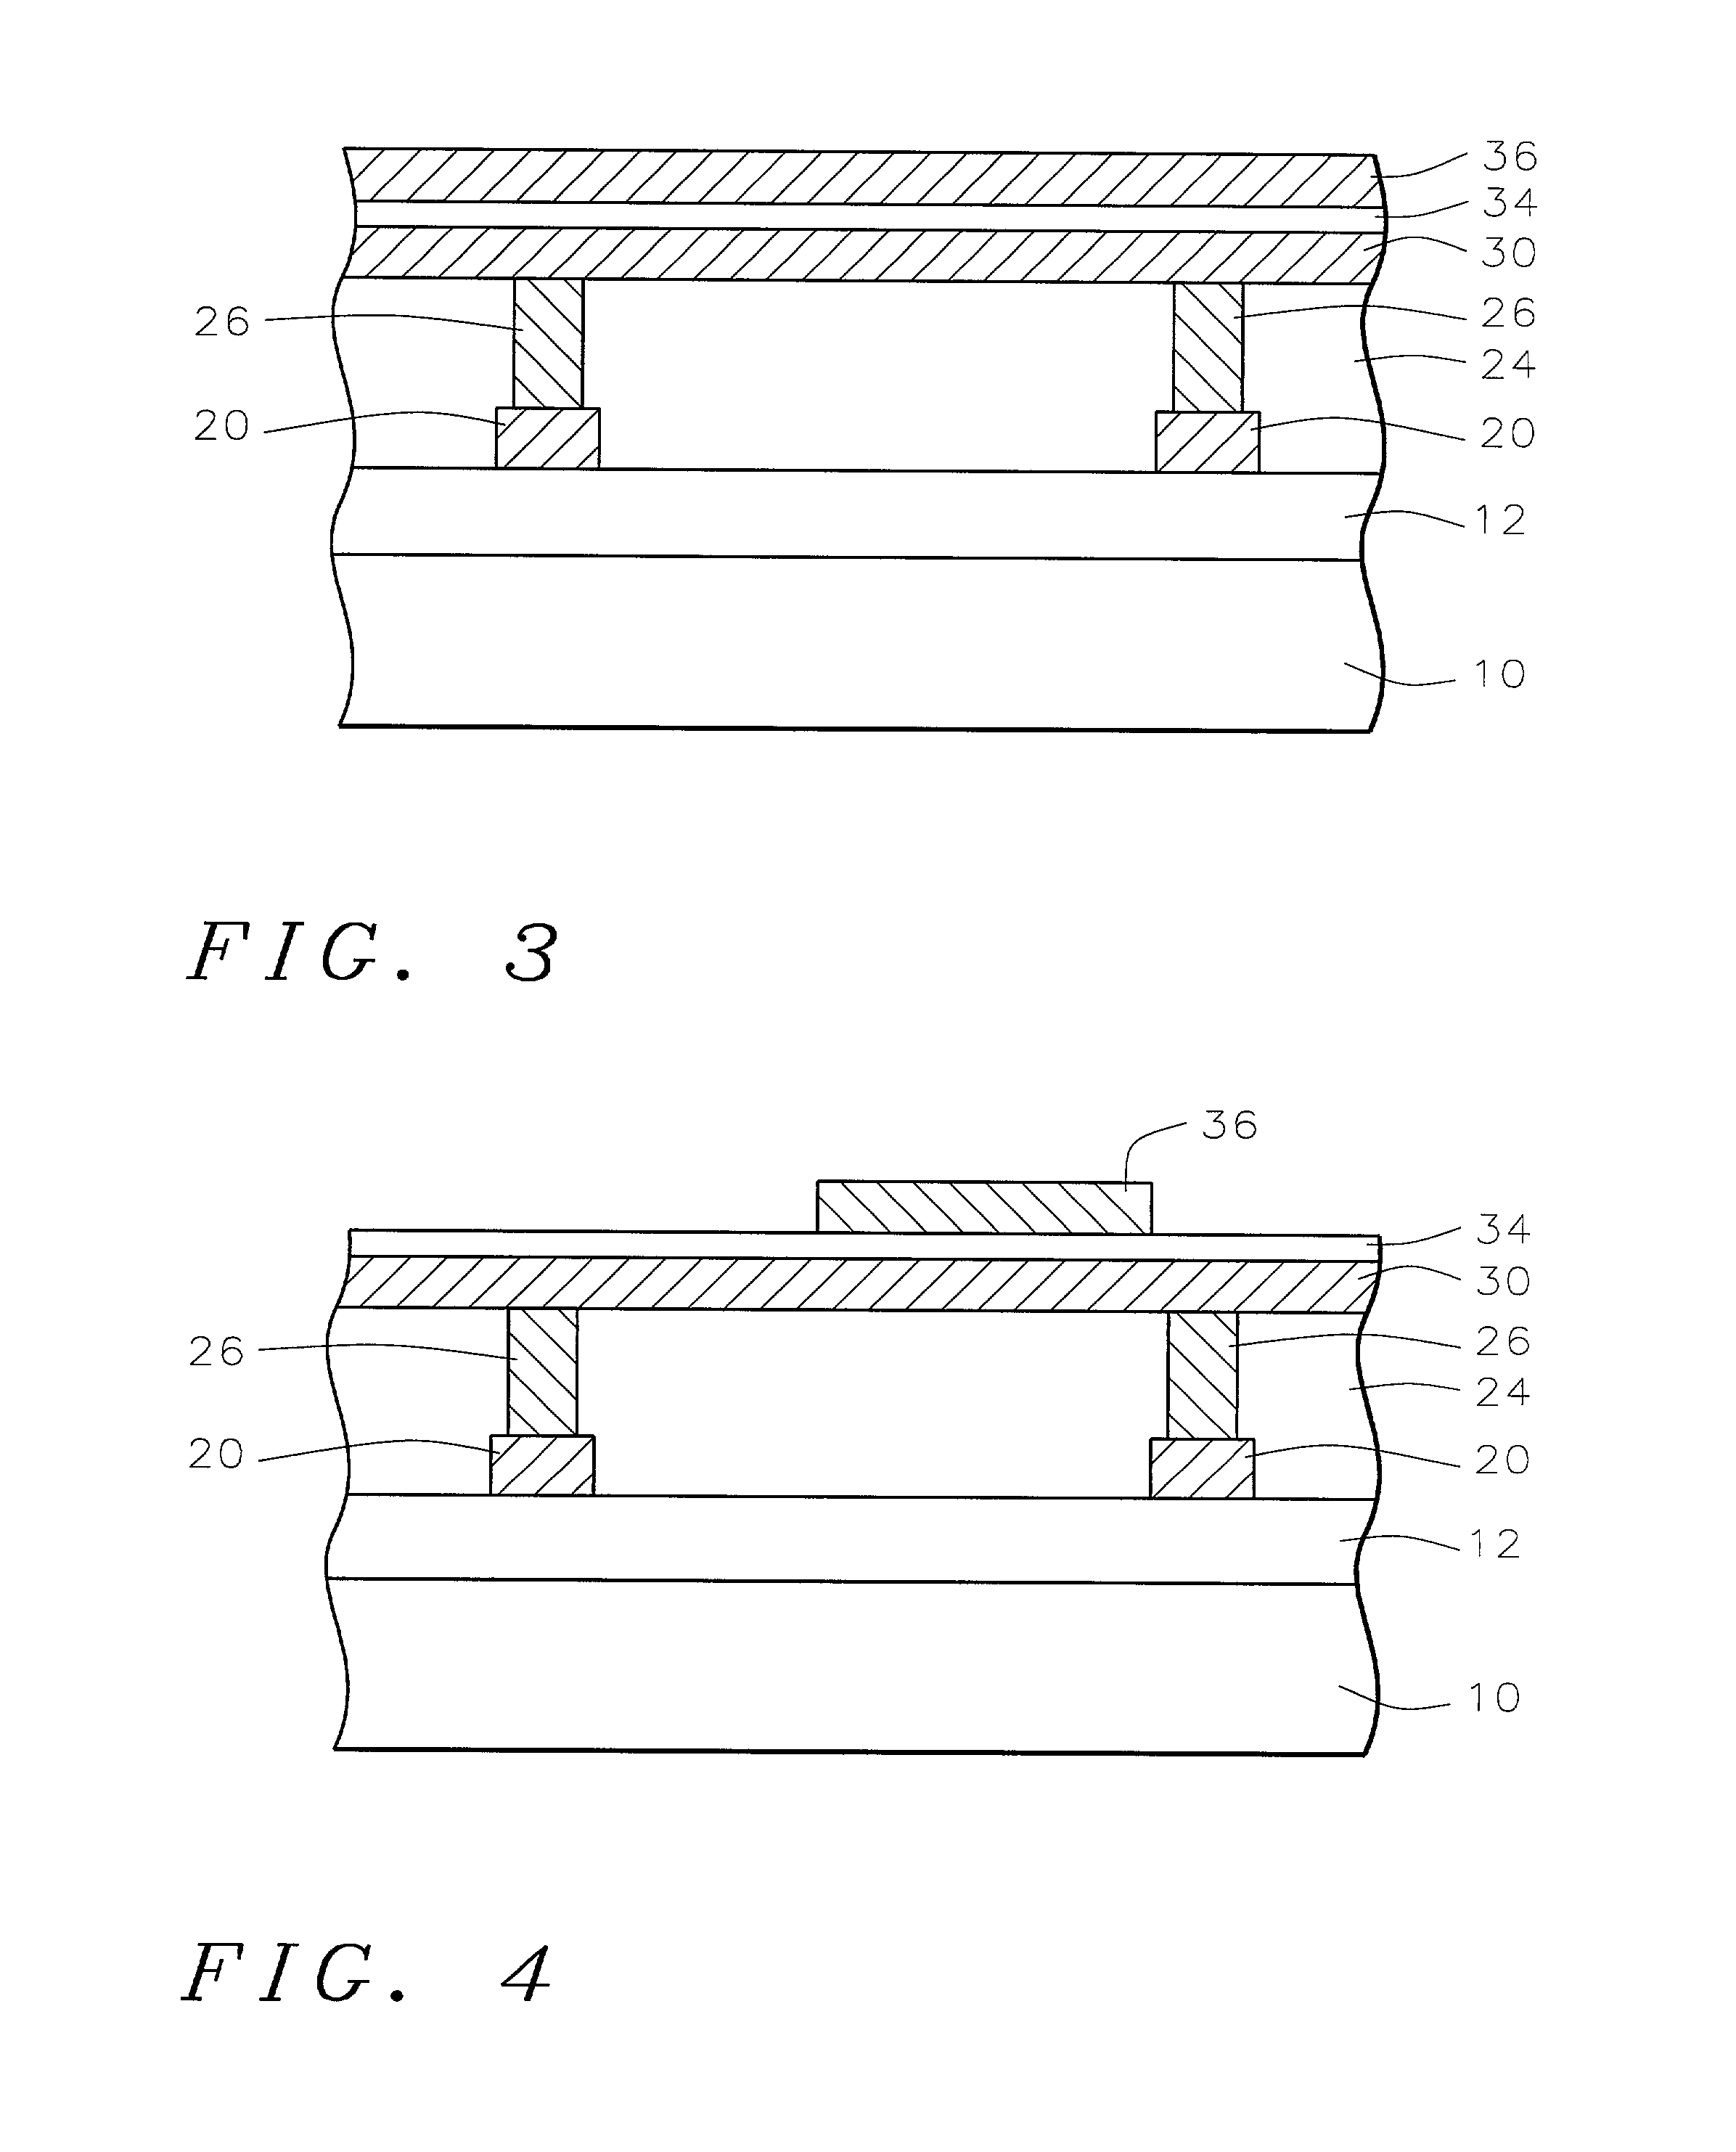 Method of making a metal-insulator-metal capacitor in the CMOS process